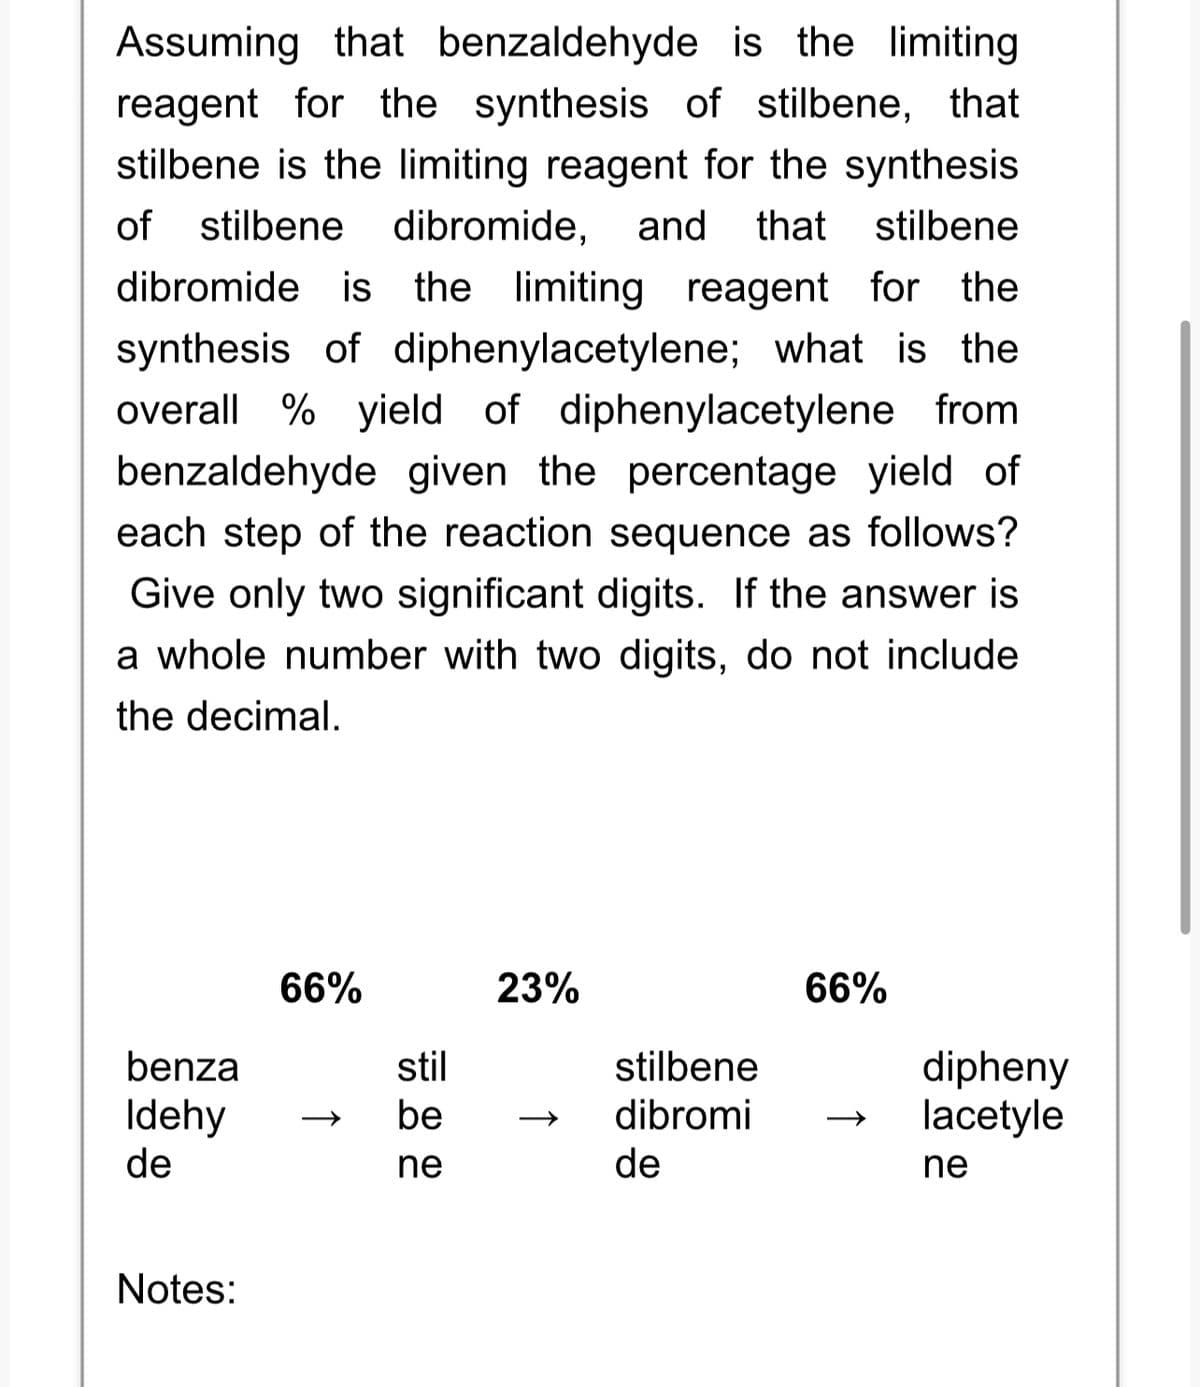 Assuming that benzaldehyde is the limiting
reagent for the synthesis of stilbene, that
stilbene is the limiting reagent for the synthesis
of stilbene dibromide, and that stilbene
dibromide is the limiting reagent for the
synthesis of diphenylacetylene; what is the
overall % yield of diphenylacetylene from
benzaldehyde given the percentage yield of
each step of the reaction sequence as follows?
Give only two significant digits. If the answer is
a whole number with two digits, do not include
the decimal.
benza
Idehy
de
Notes:
66%
stil
be
ne
23%
stilbene
dibromi
de
66%
dipheny
lacetyle
ne